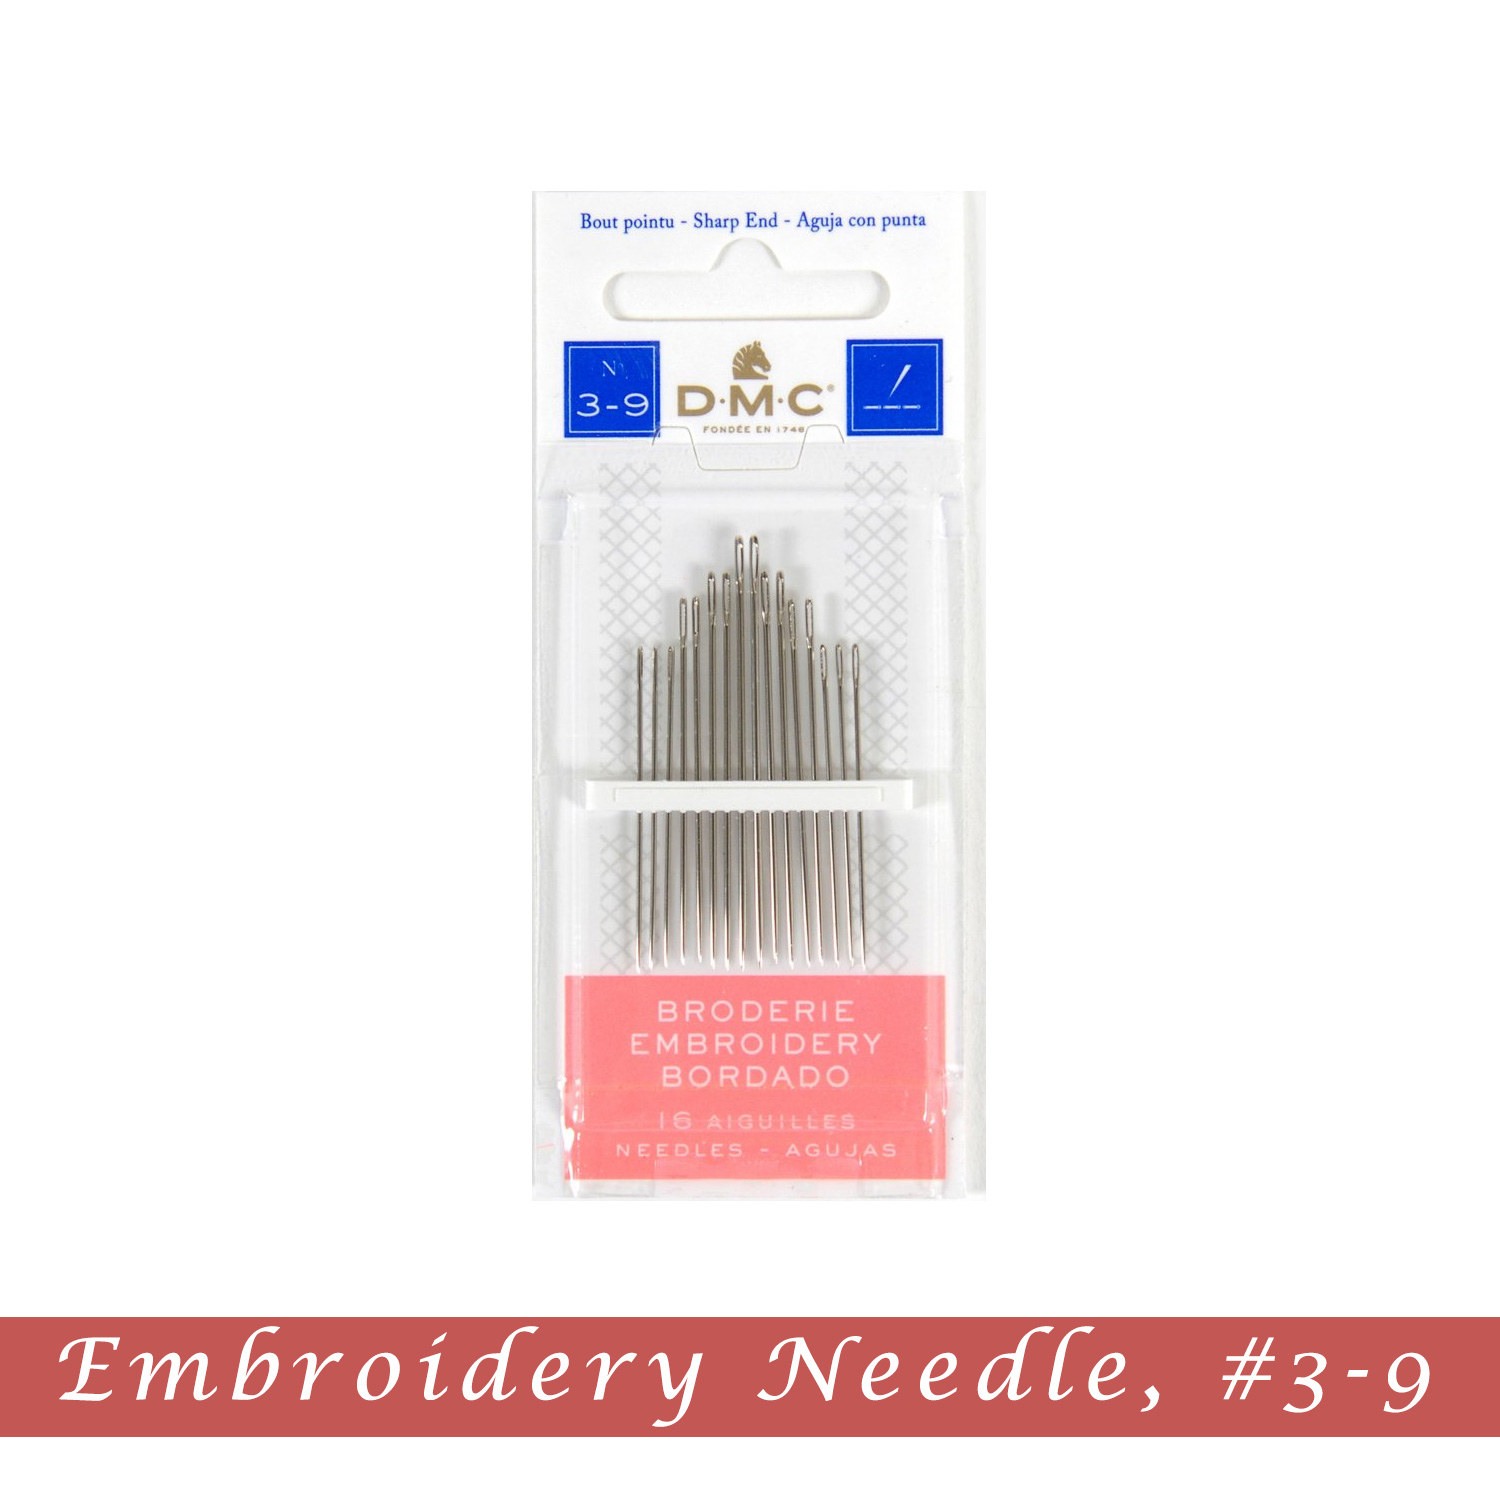 Sewing Needle  DMC Chenille Hand Sewing Needles Size #24, 6 Pack